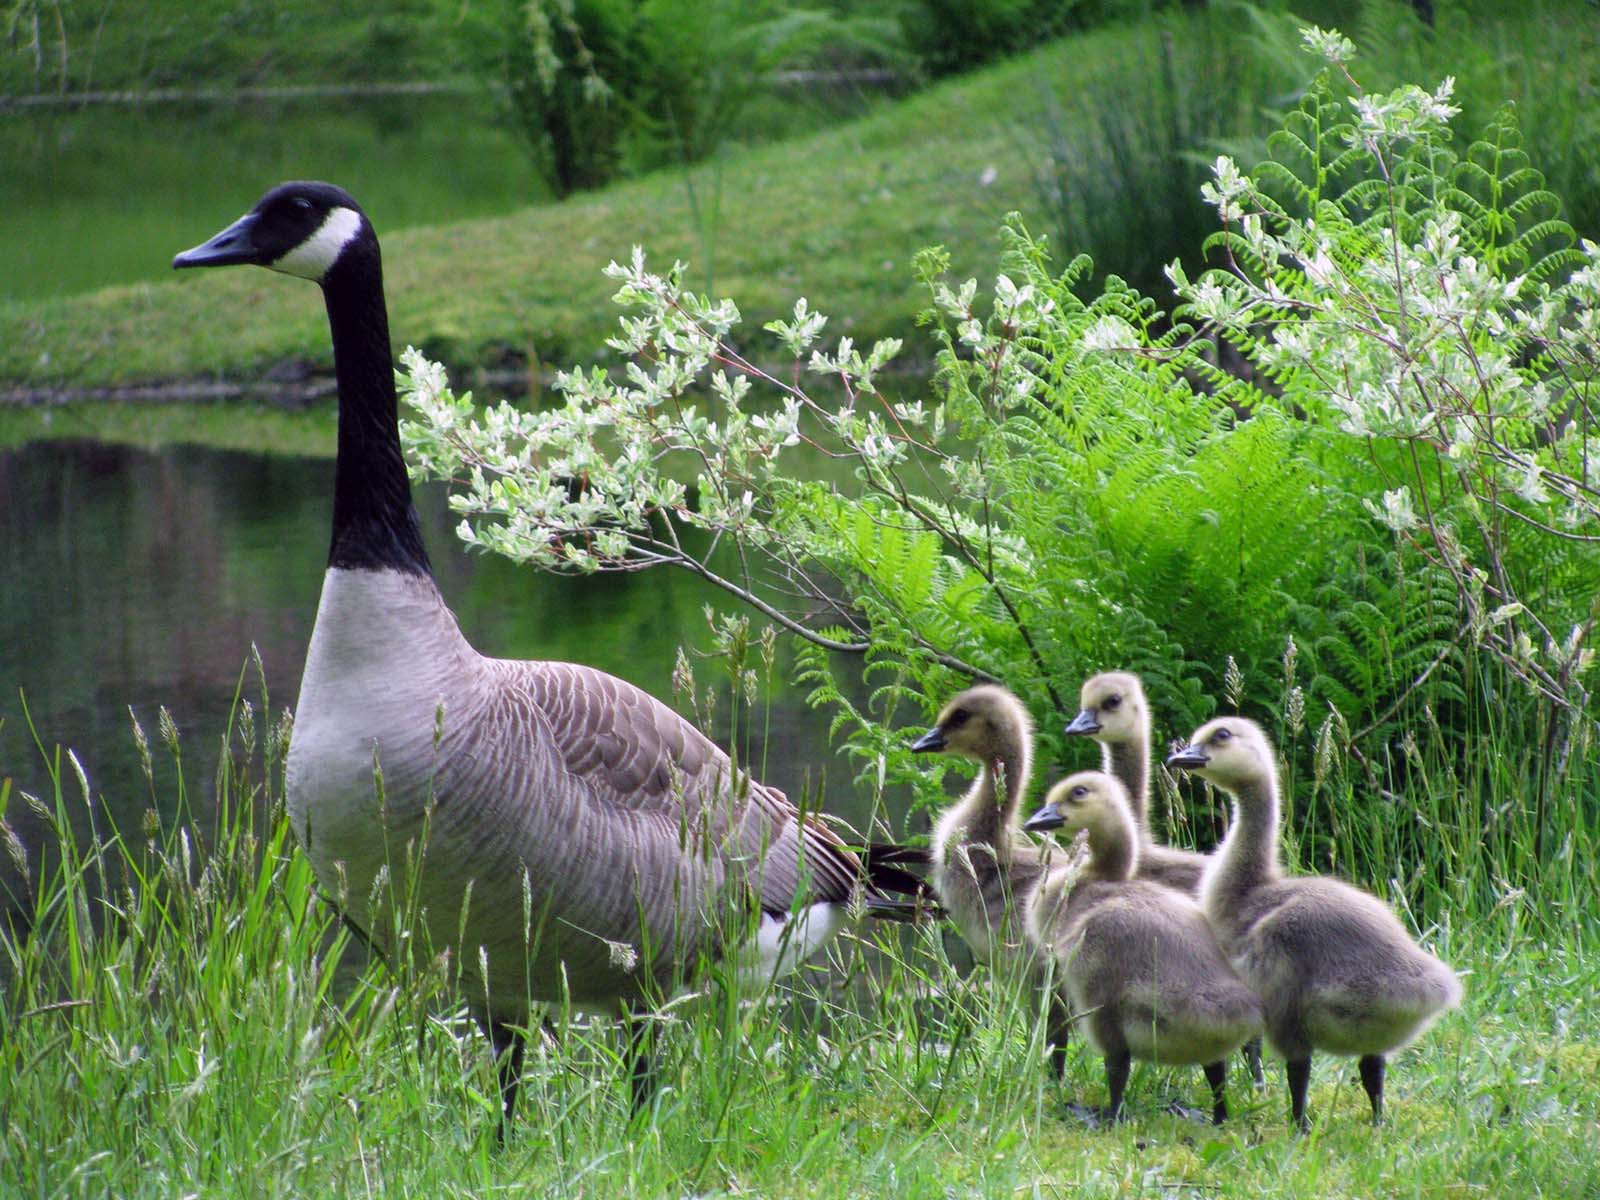 Group of wild canada geese with a parent and four cute goslings by water on the grass